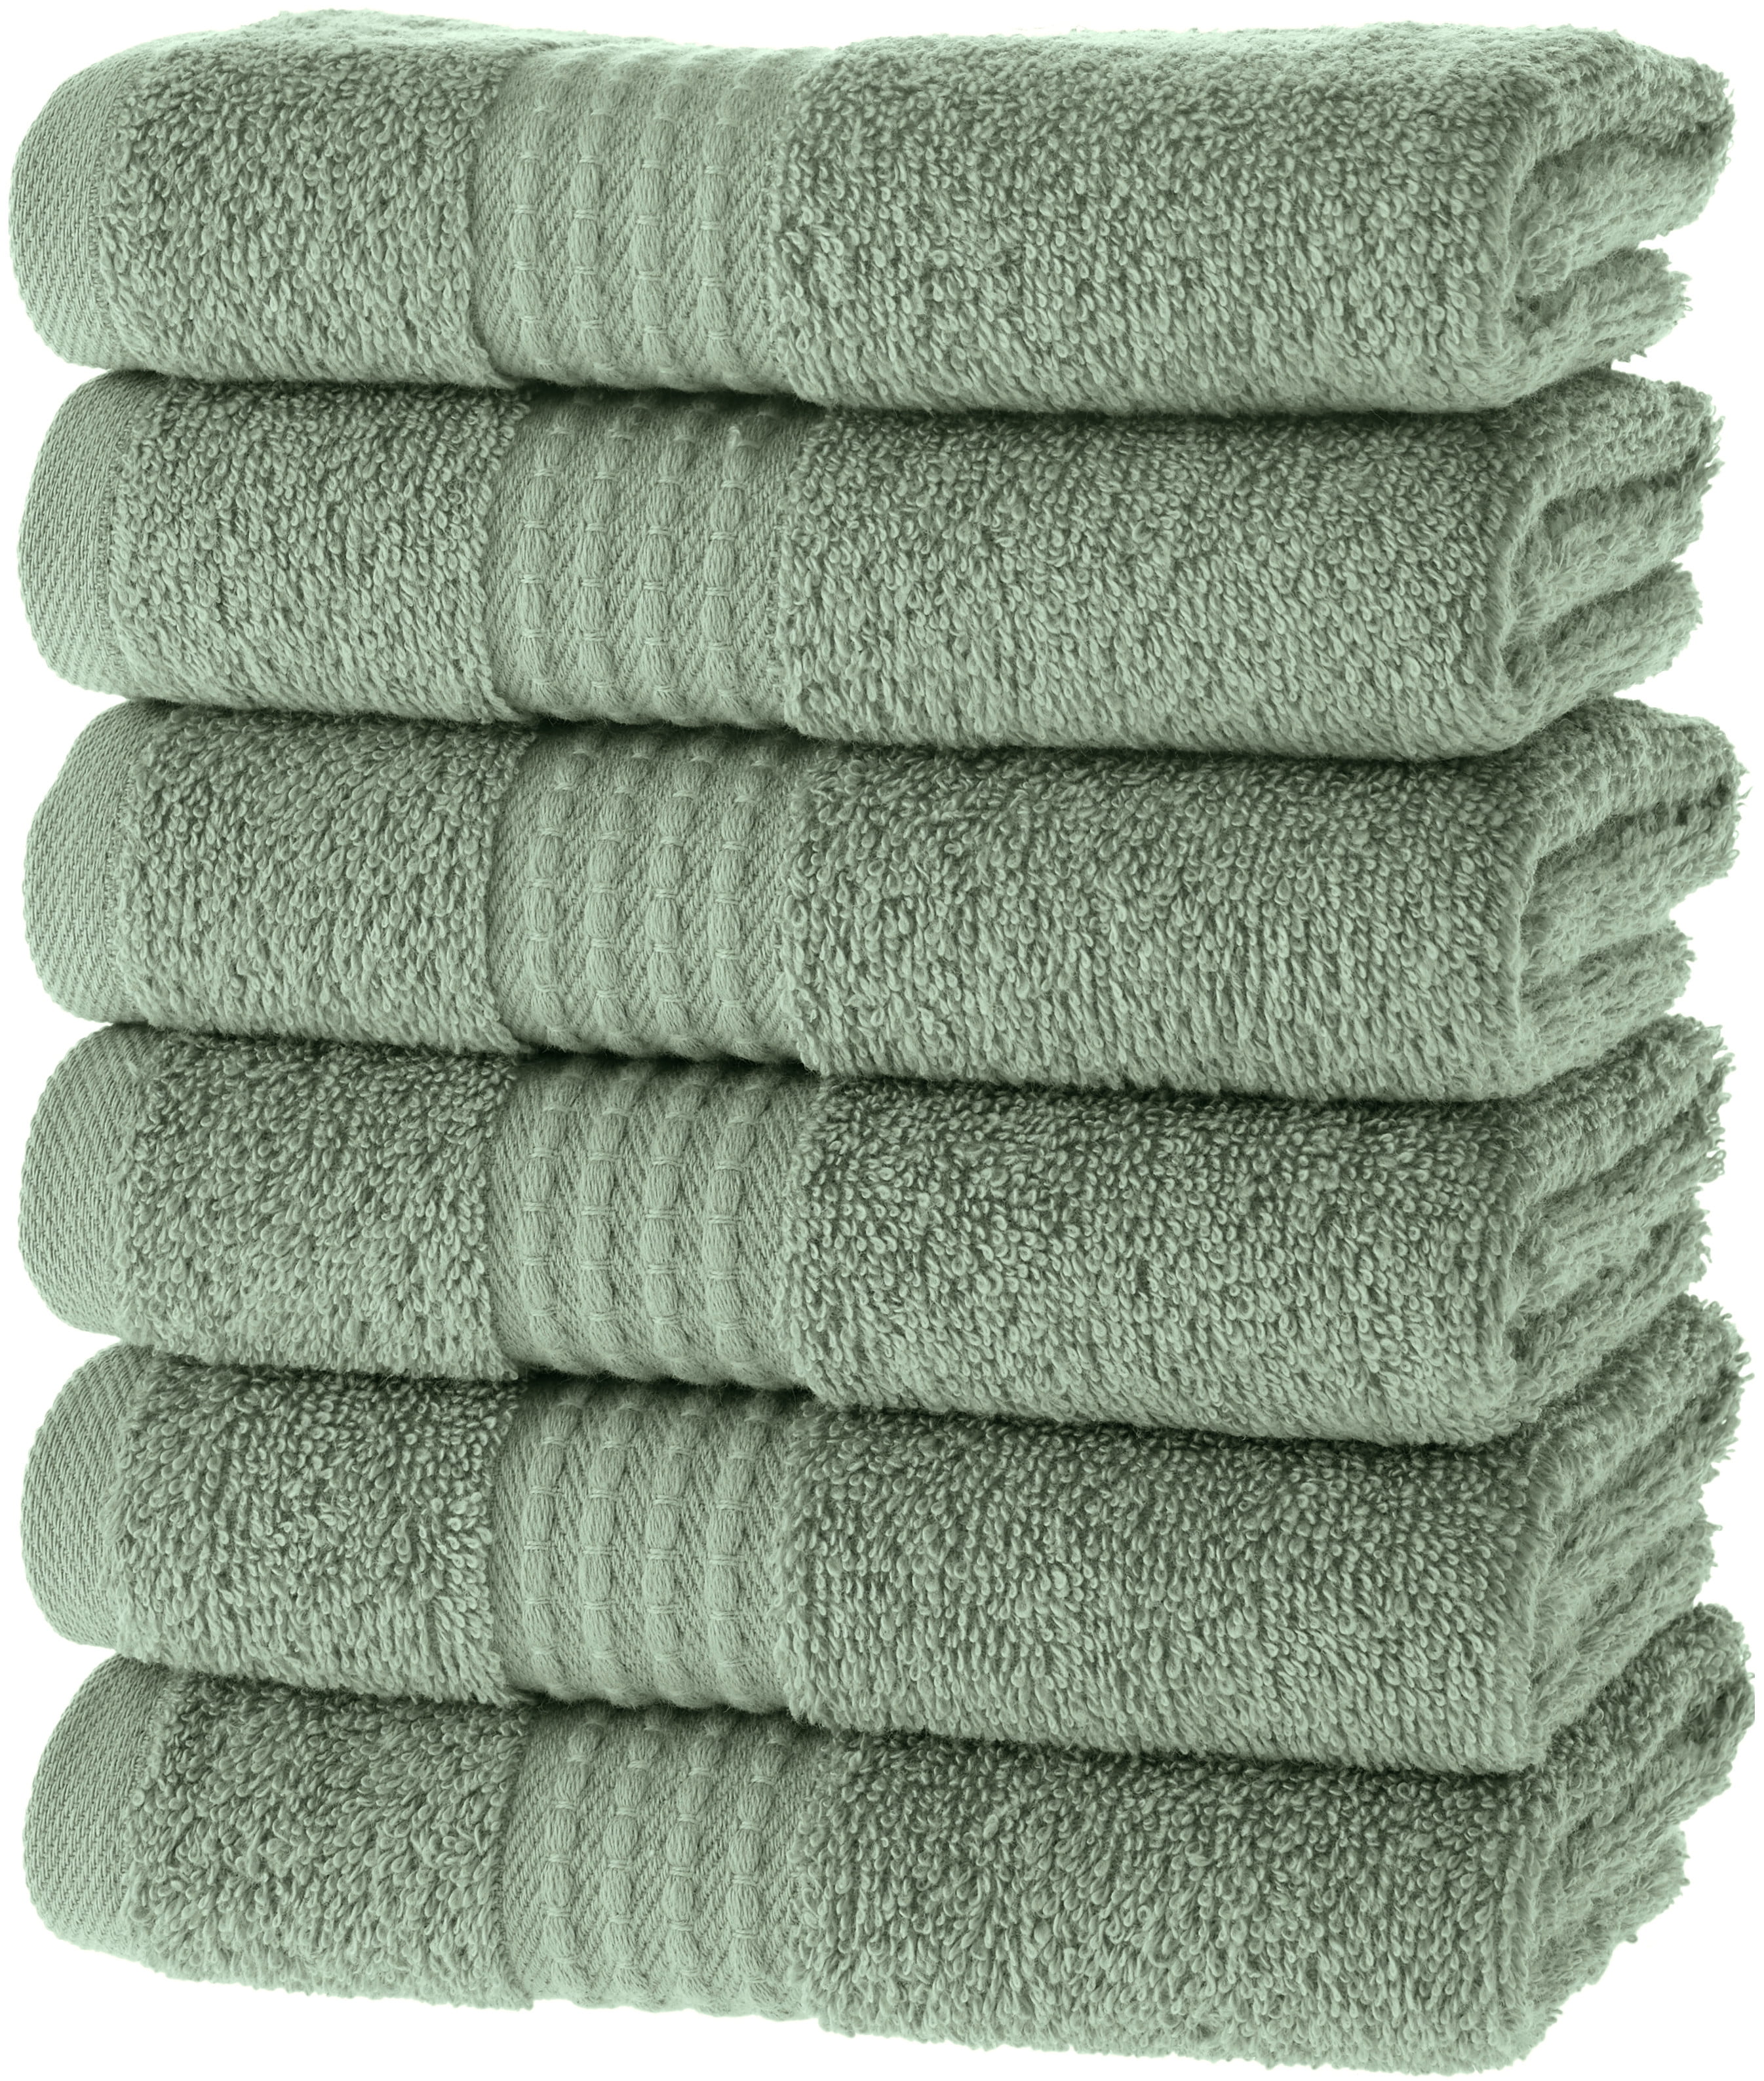 MAURA Basics Performance Wash Cloths with Hanging Loop. 13”x13” American  Standard Towel size. Soft, Durable, Long Lasting and Absorbent | 100%  Turkish